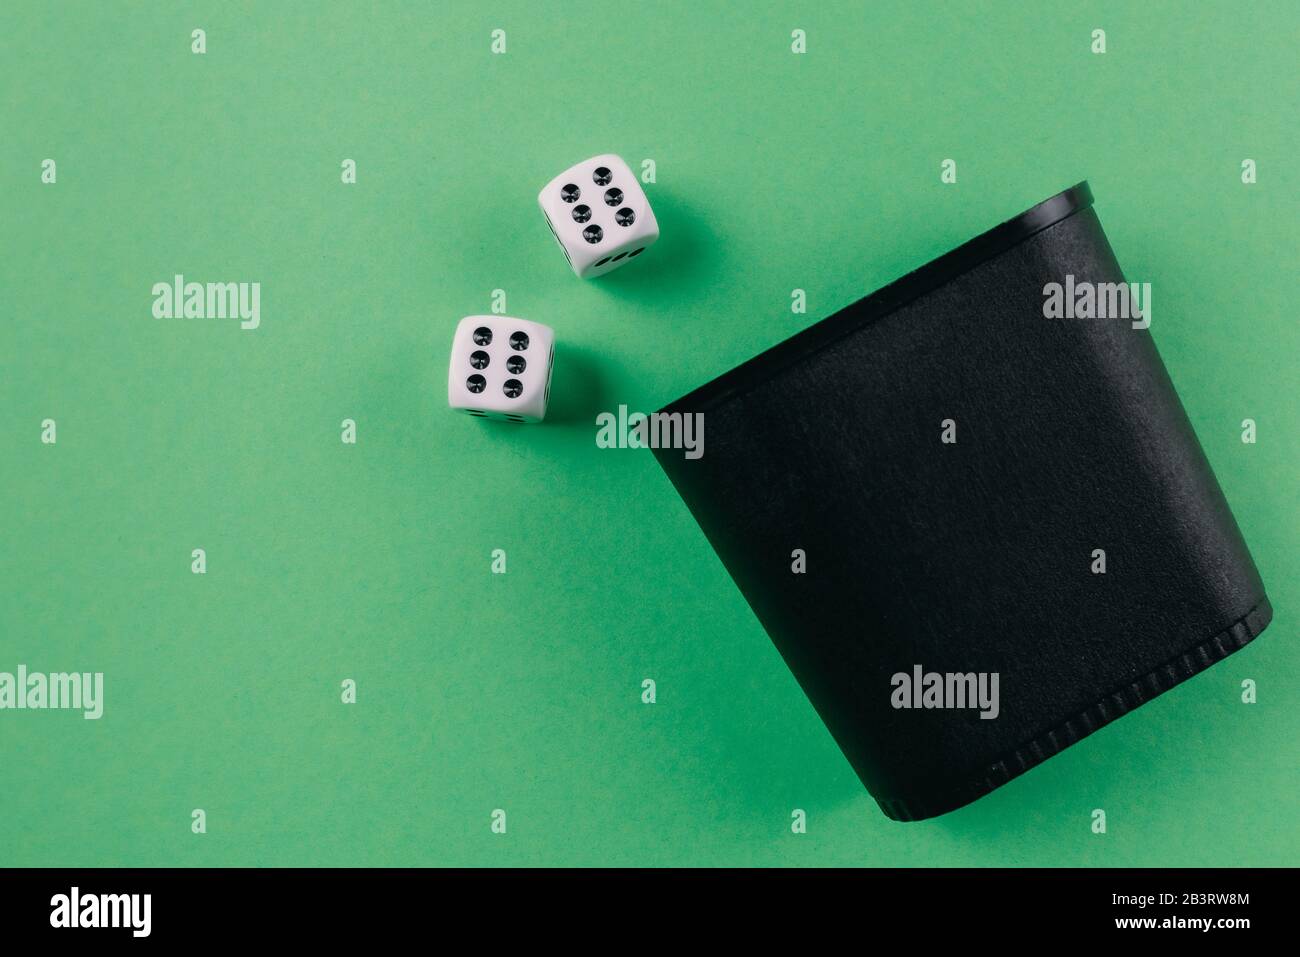 top view of dice shaker and dices on green gambling table background Stock Photo